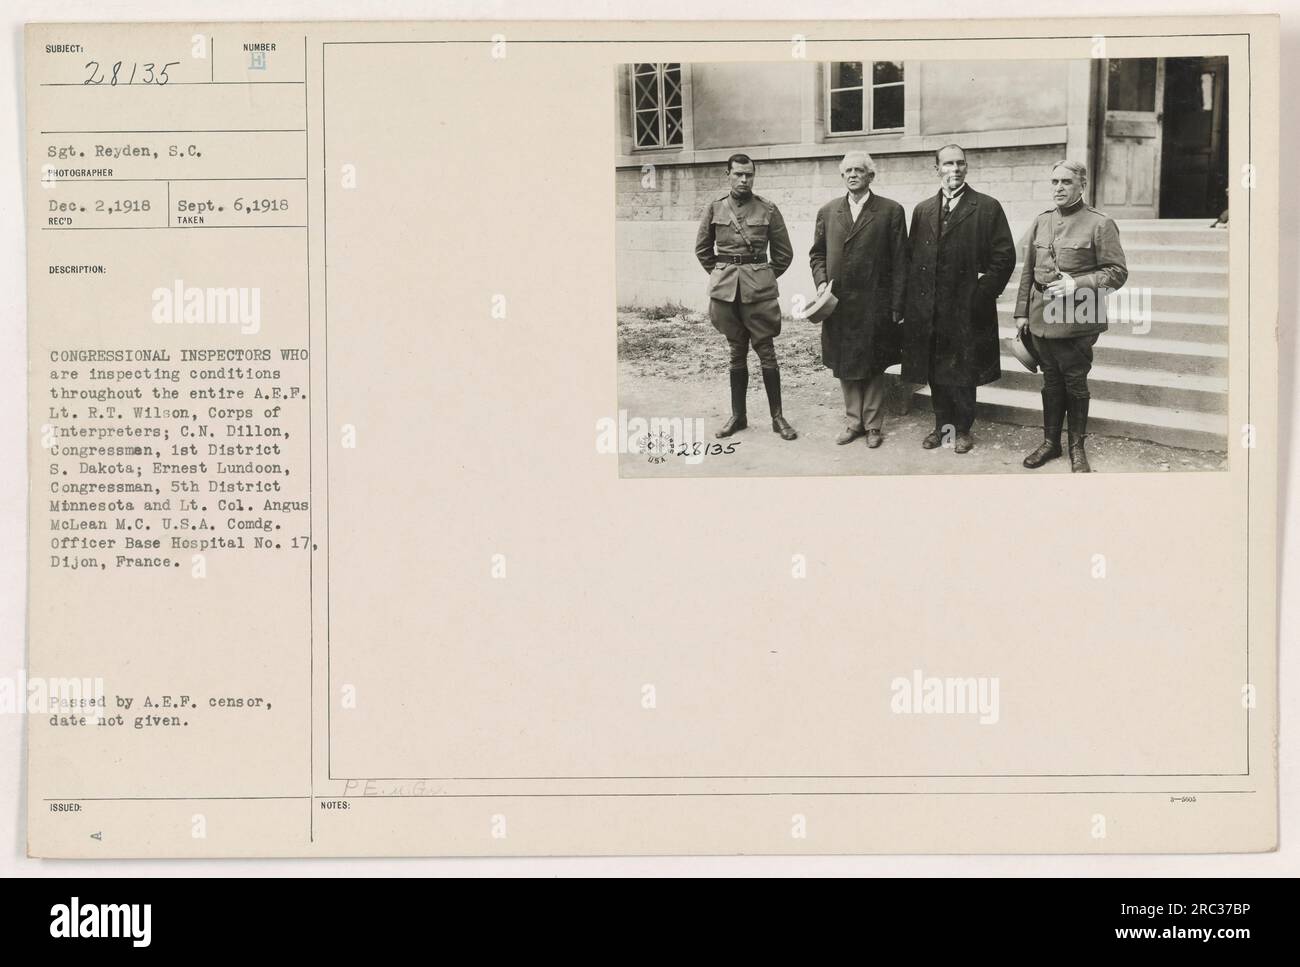 Congressional inspectors conducting a site visit at Base Hospital No. 17 in Dijon, France during World War One. Pictured are Lt. R.T. Wilson, Corps of Interpreters; C.N. Dillon, Congressman, 1st District South Dakota; Ernest Lundoon, Congressman, 5th District Minnesota; and Lt. Col. Angus McLean M.C. U.S.A., Commanding Officer of the hospital. Photograph taken on September 6, 1918. Stock Photo